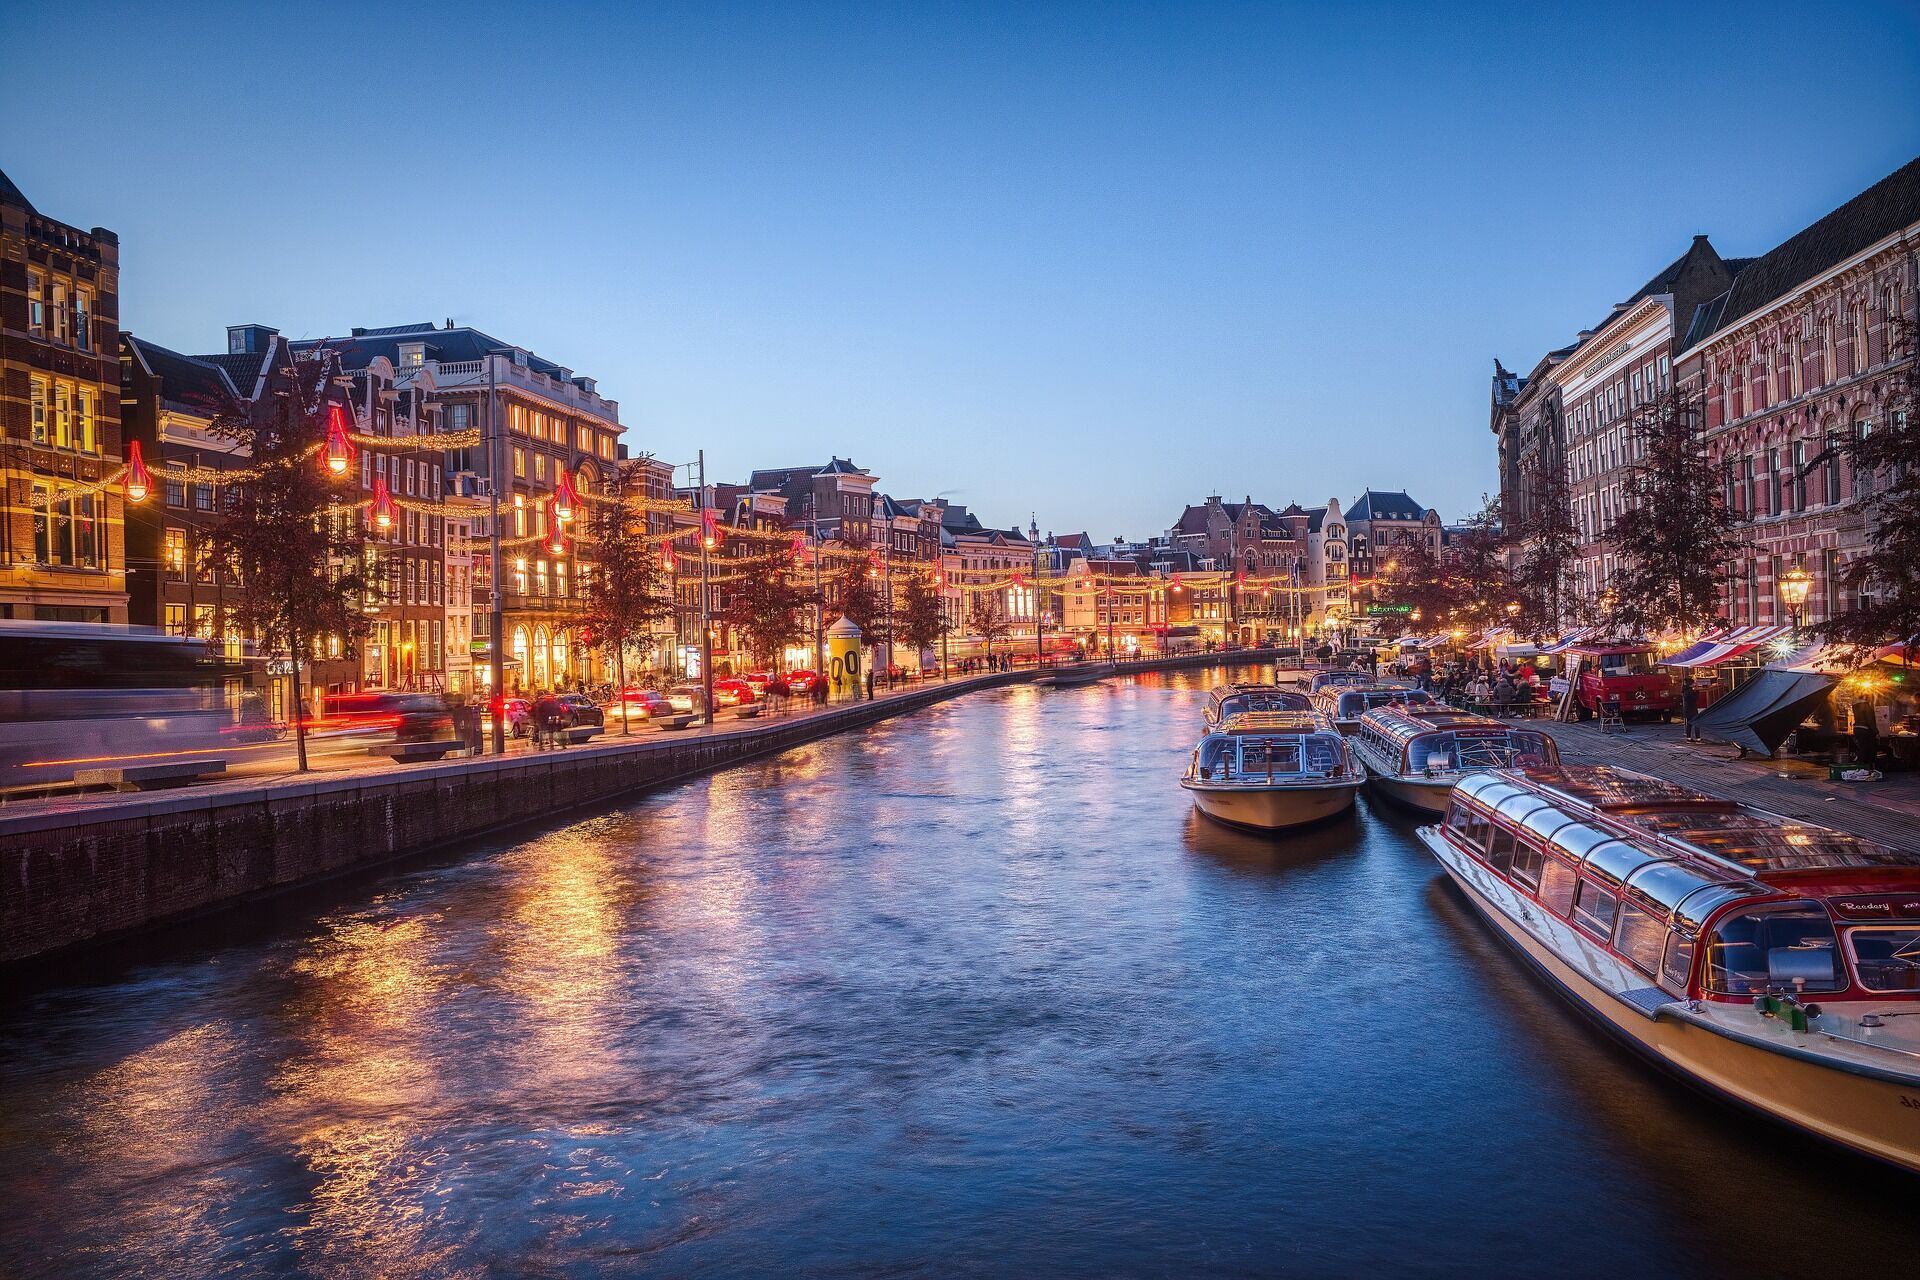 Amsterdam, the most expensive city in Europe